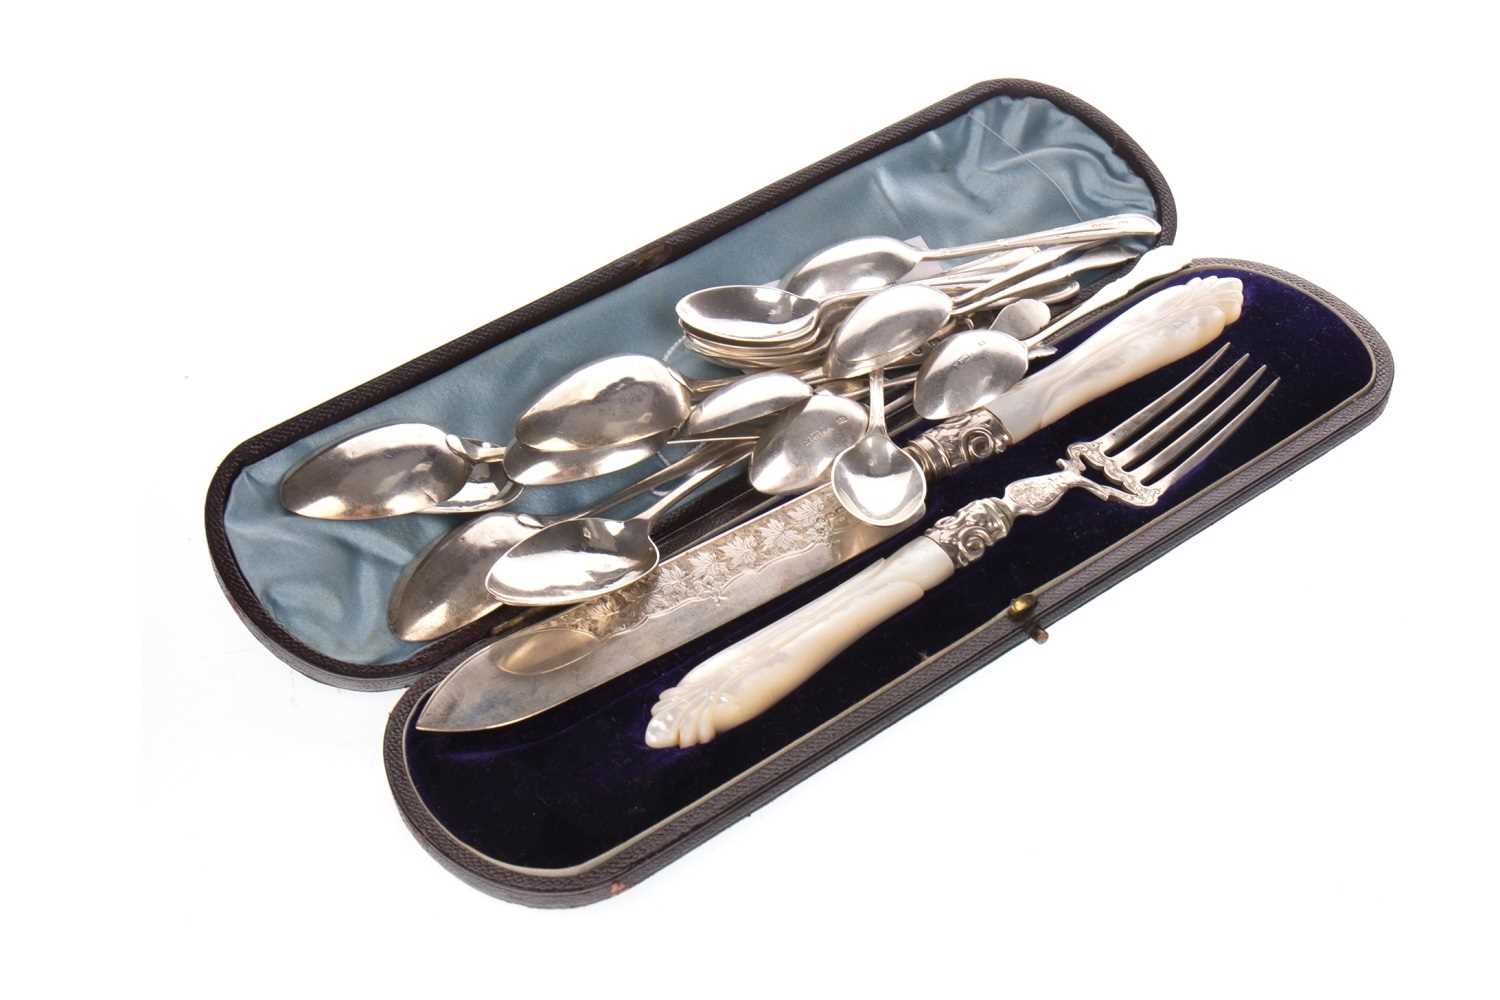 Lot 901 - A VICTORIAN SILVER AND MOTHER OF PEARL SERVING KNIFE AND FORK ALONG WITH SILVER SPOONS